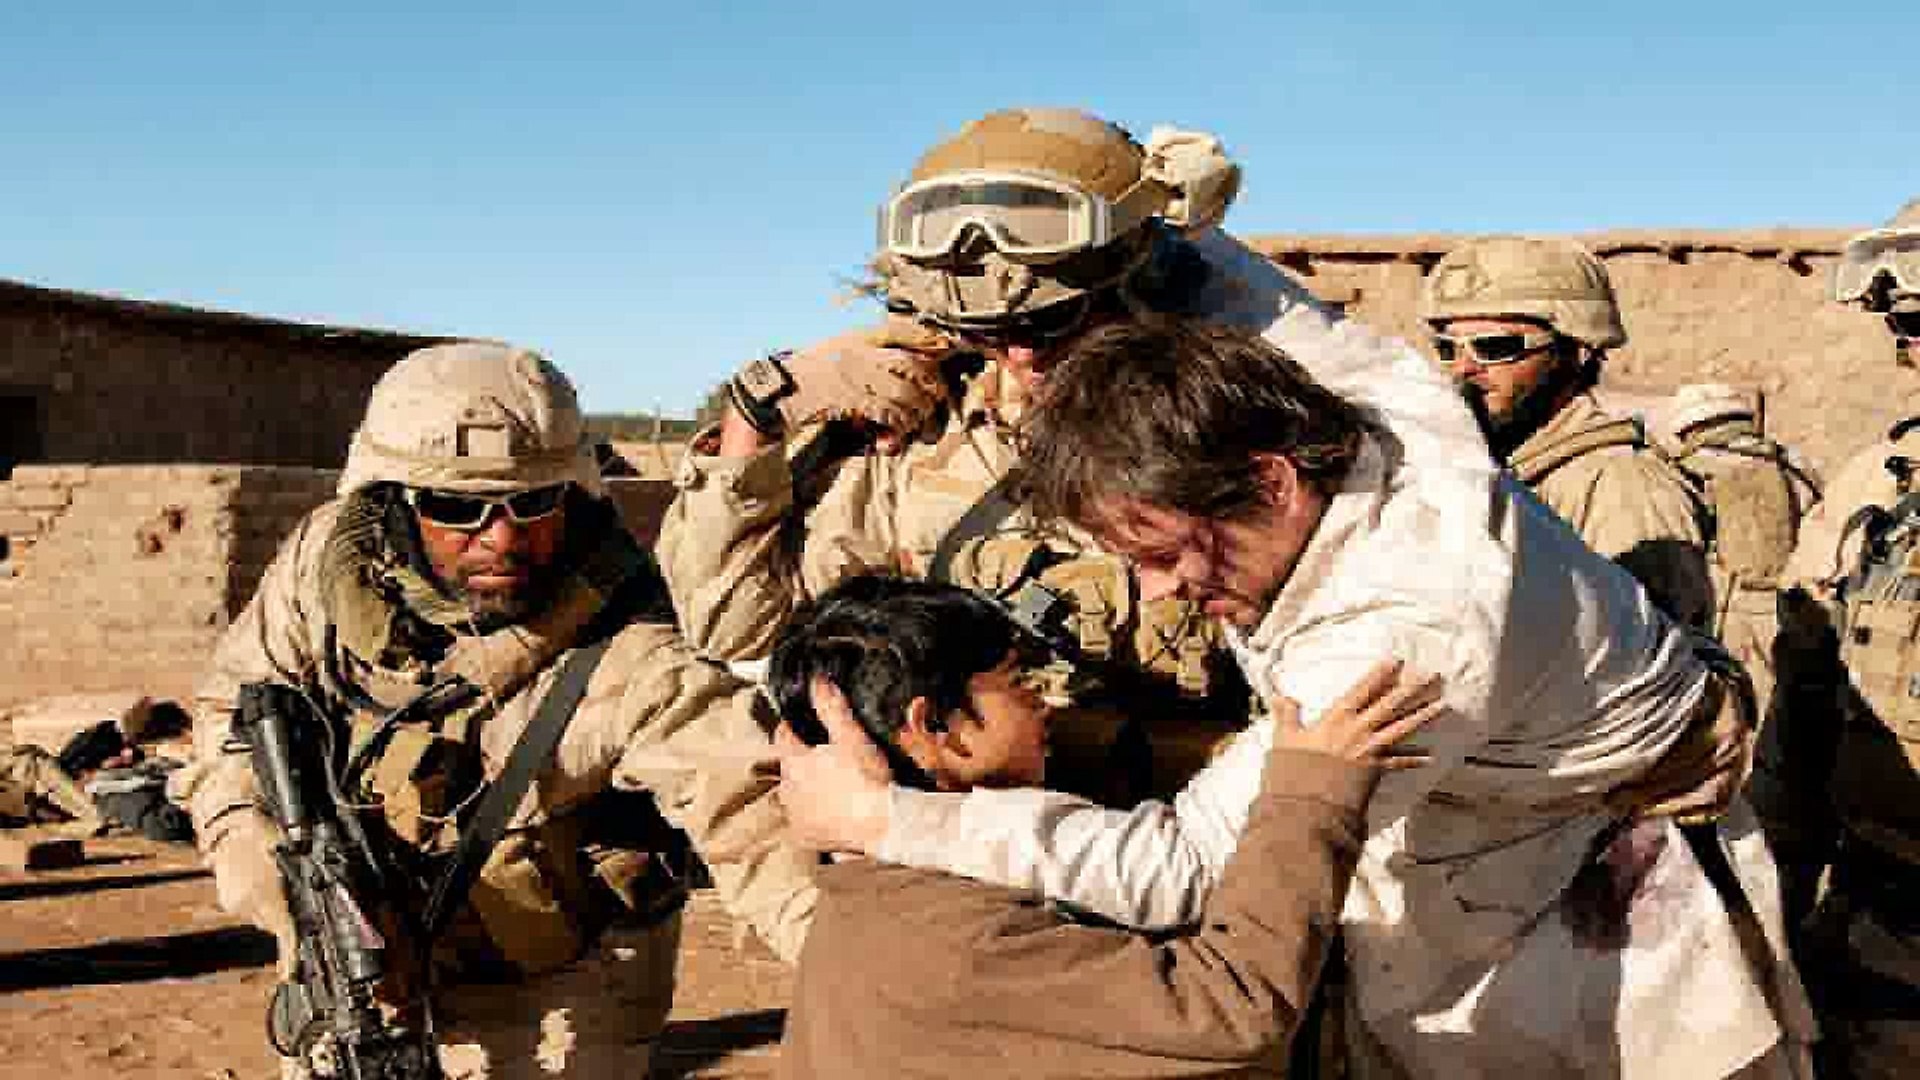 Lone Survivor with Mark Wahlberg – Behind the Scenes - video Dailymotion